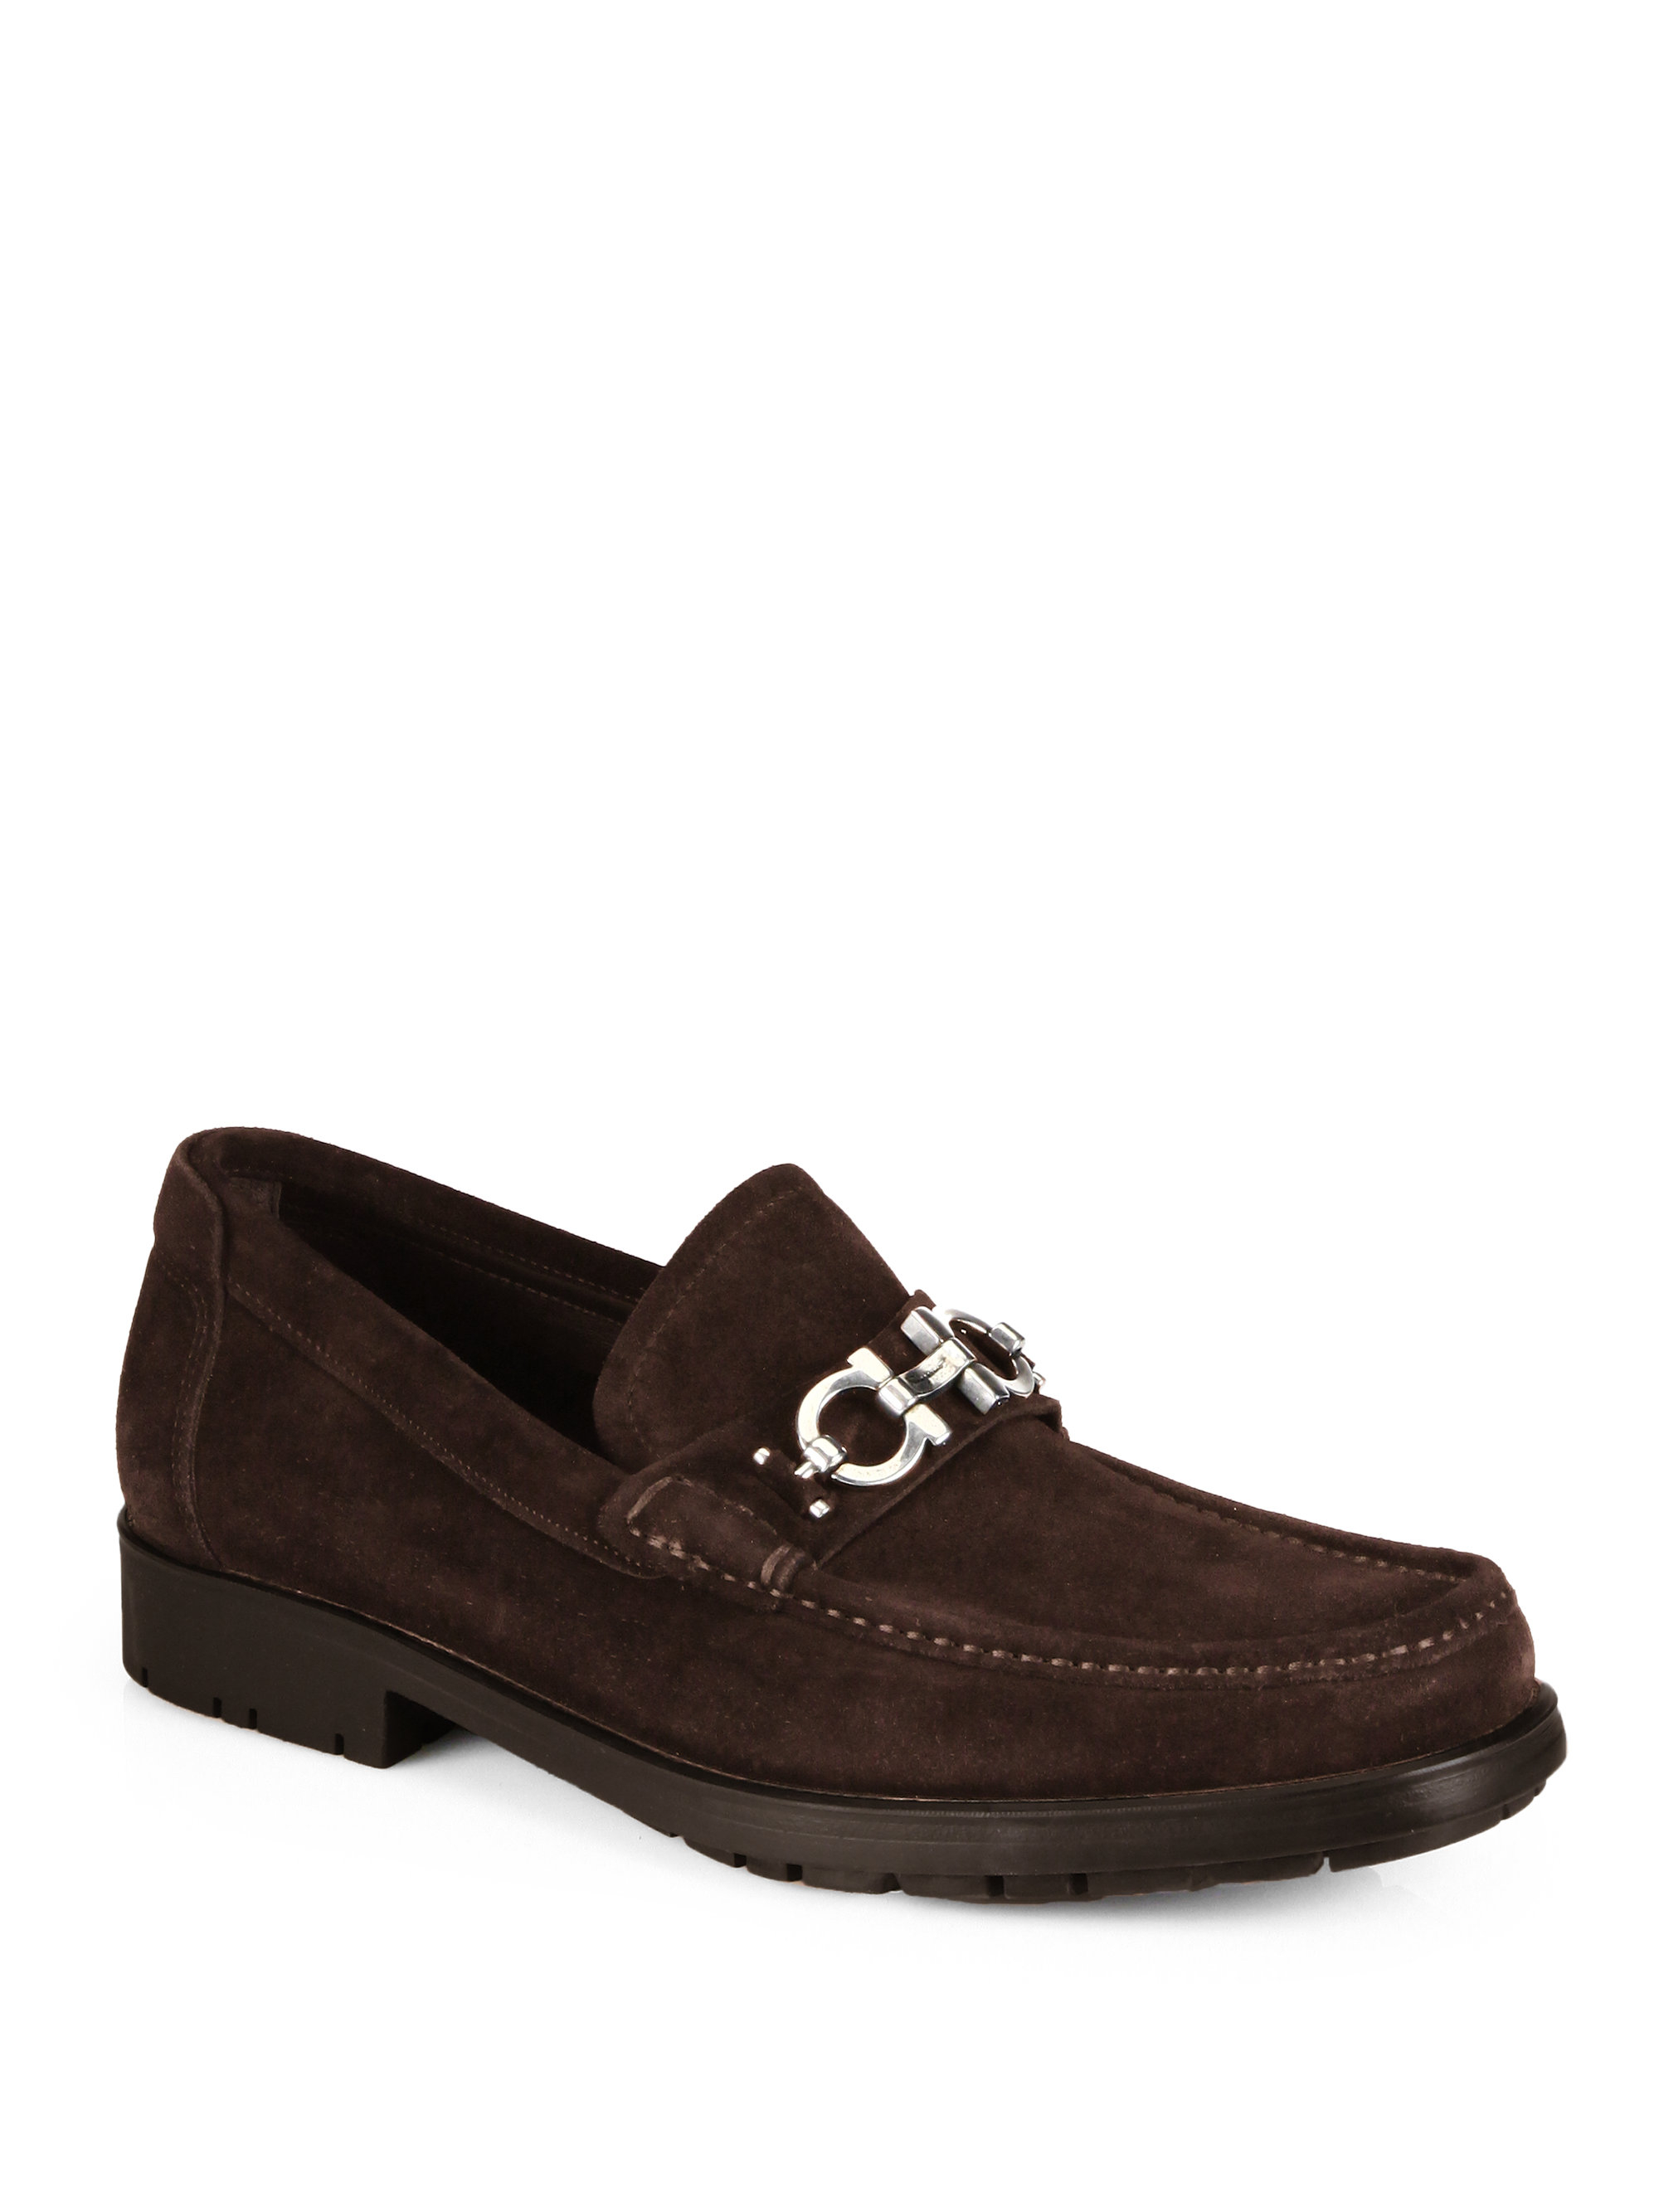 Lyst - Ferragamo Master Suede Loafers in Brown for Men